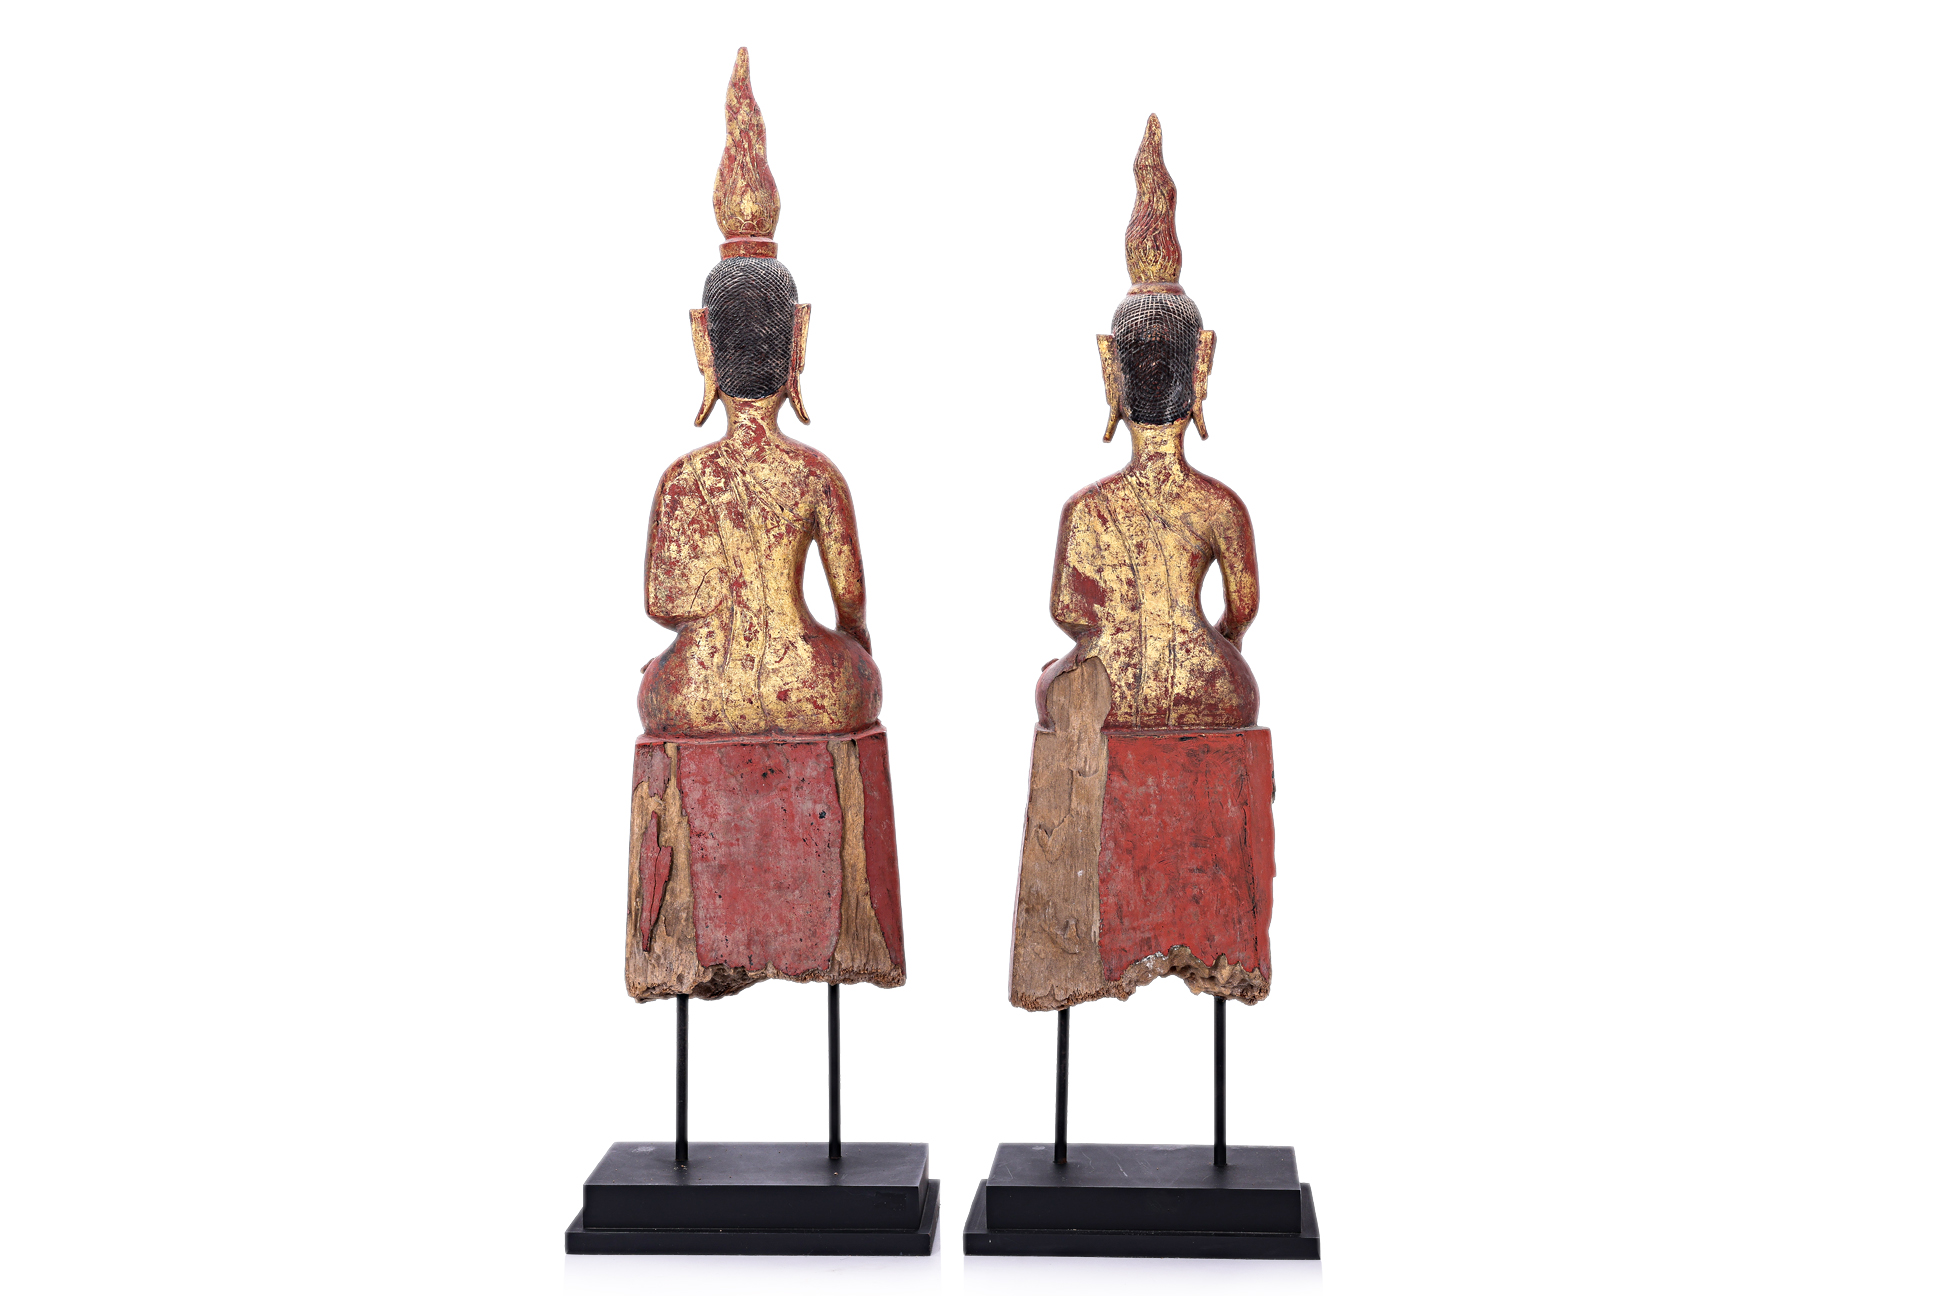 A PAIR OF LAOTIAN SEATED BUDDHA FIGURES - Image 3 of 3